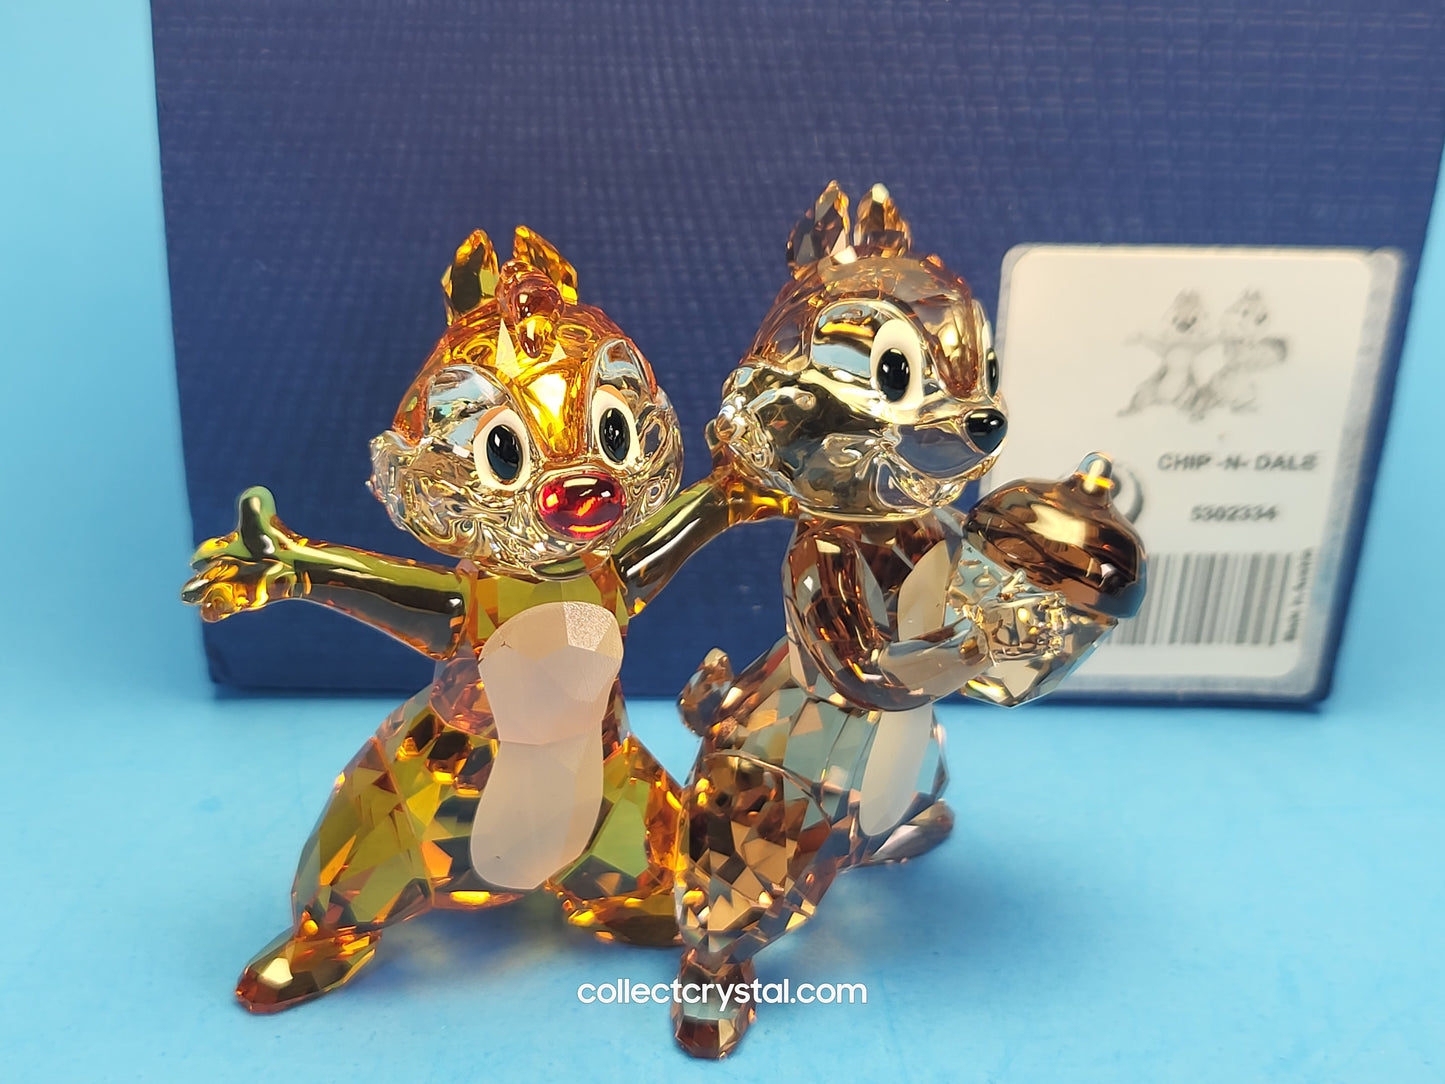 DISNEY MICKEY AND FRIENDS – CHIP ‘N’ DALE Figurine 5302334